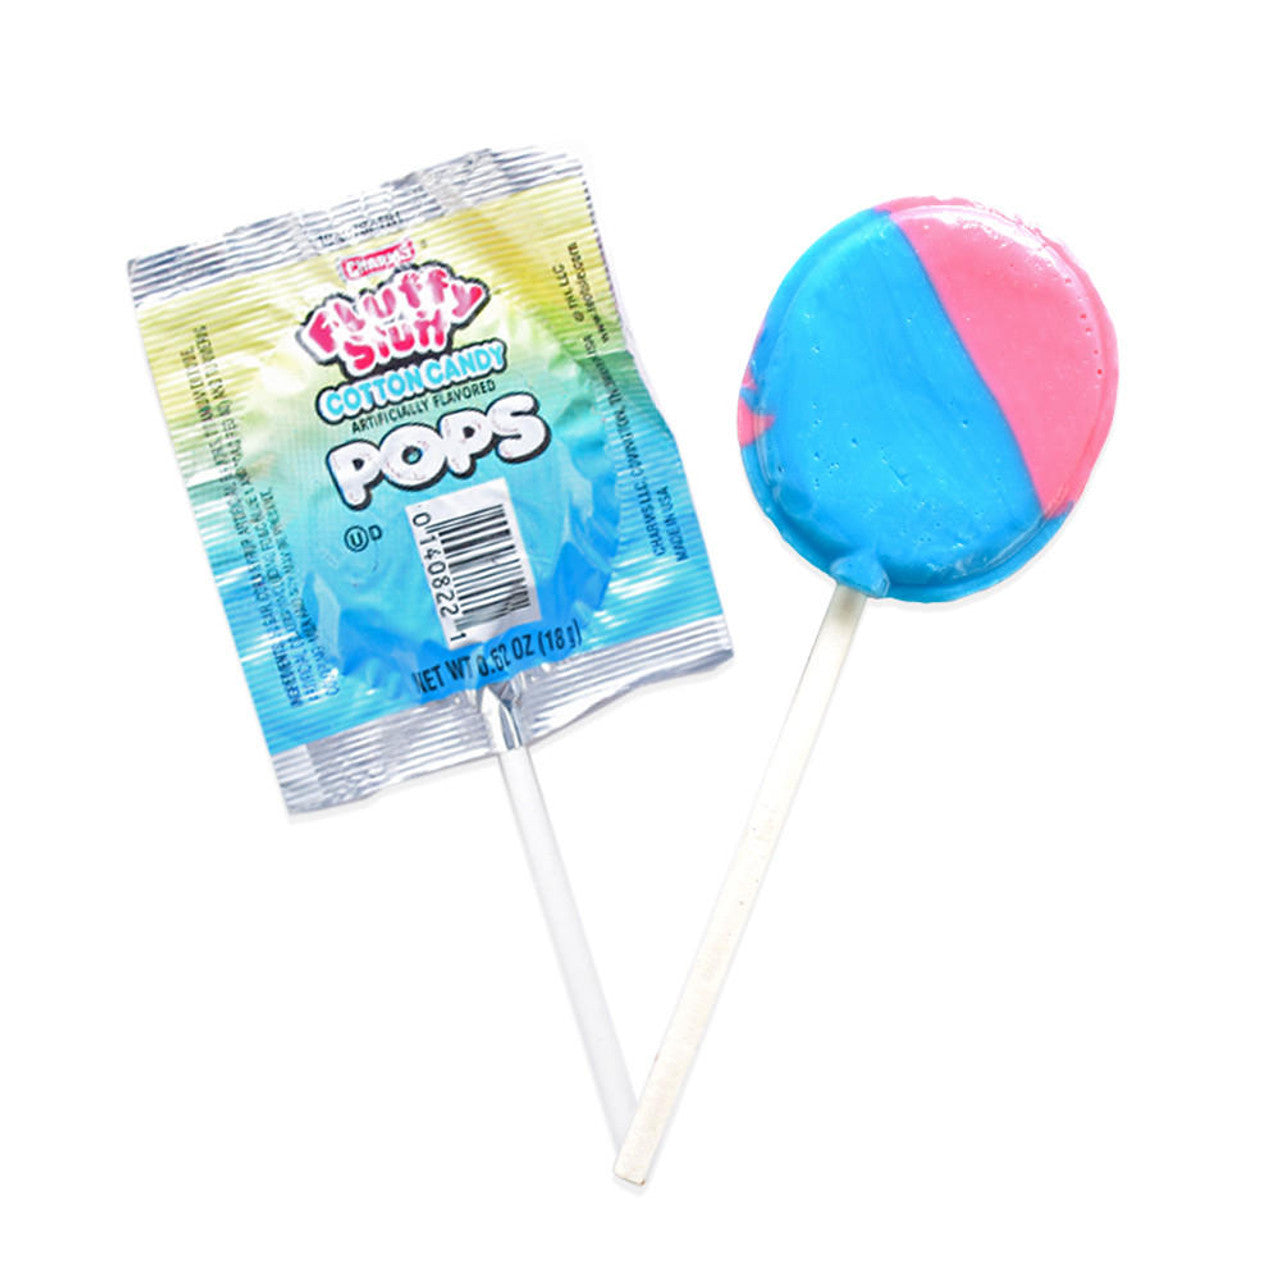 Charms Cotton Candy Fluffy Stuff Lollipops (18g)(48ct)